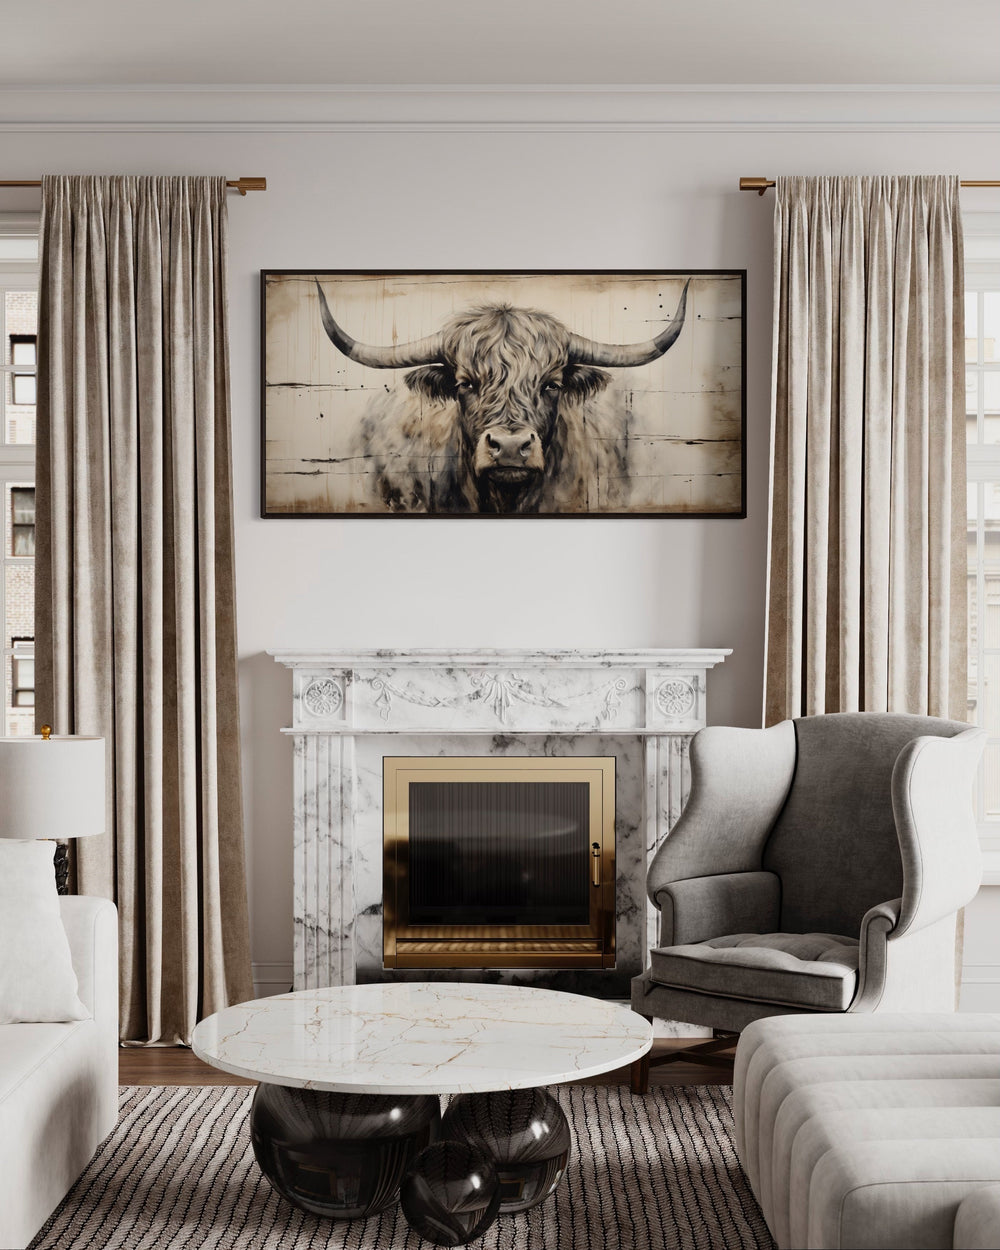 Highland Bull Painting On Wood Rustic Farmhouse Wall Art above fireplace